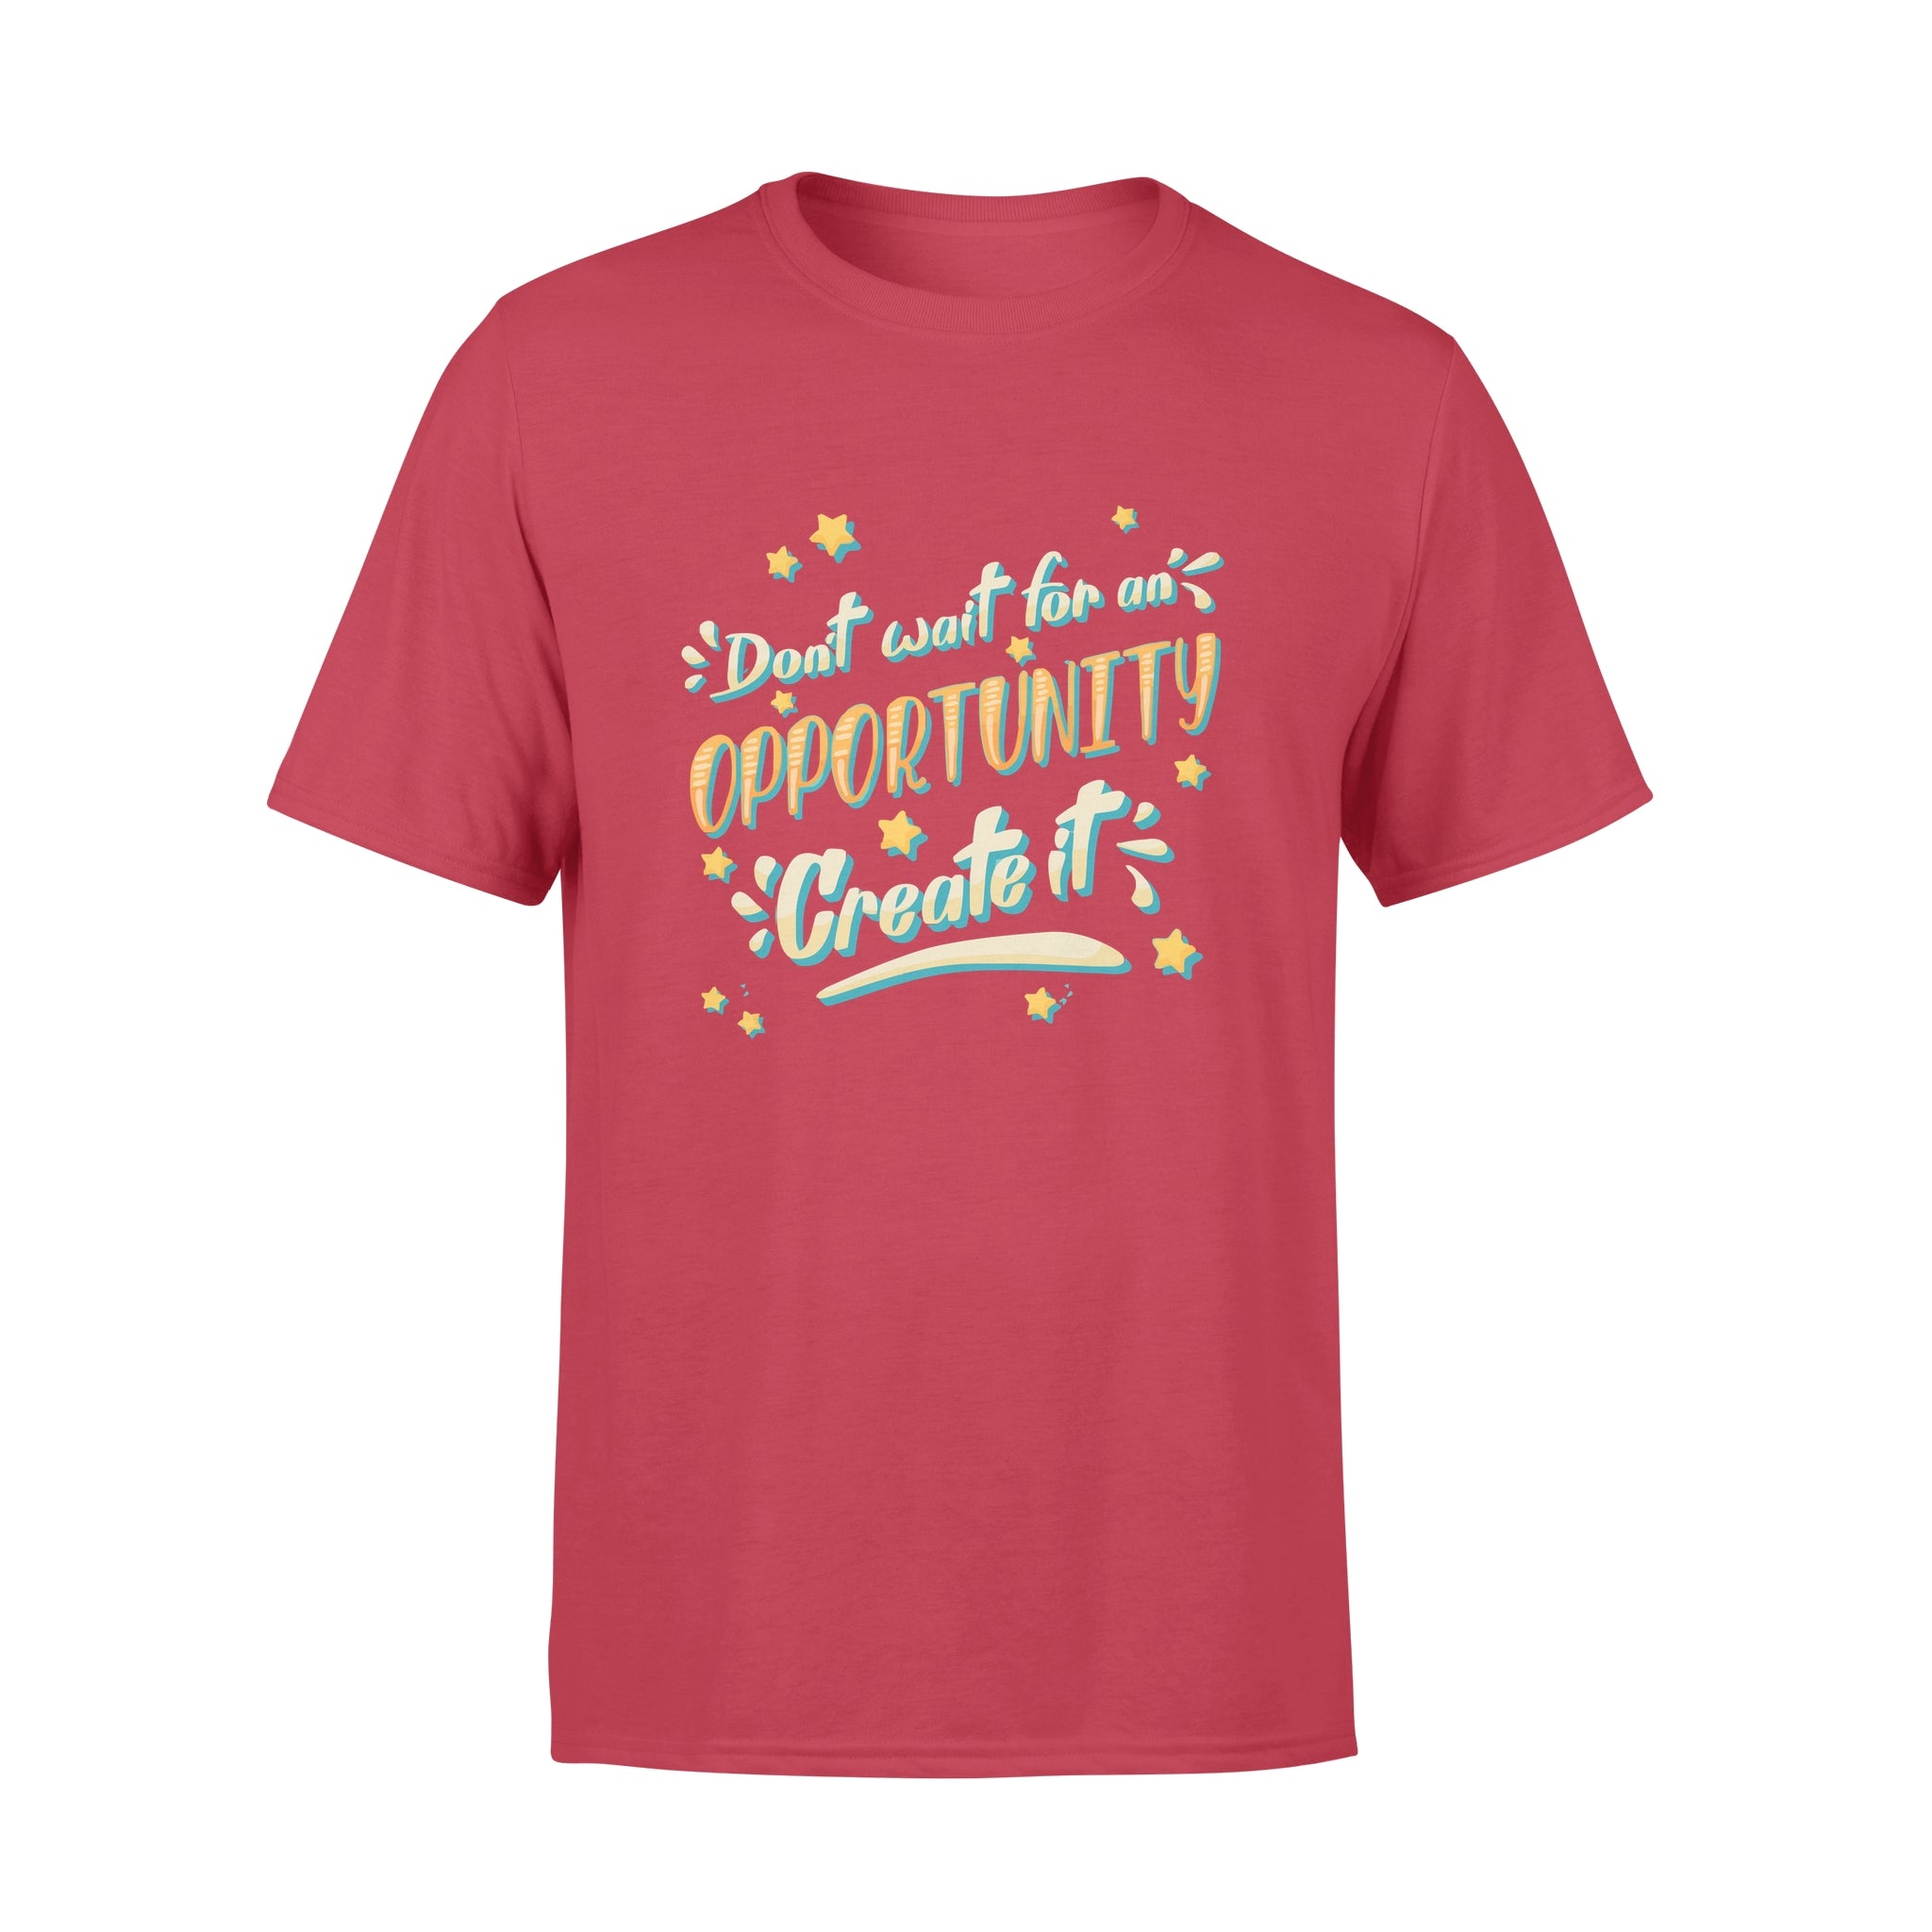 Don't Wait For An Oppoptunity Create It - T-shirt